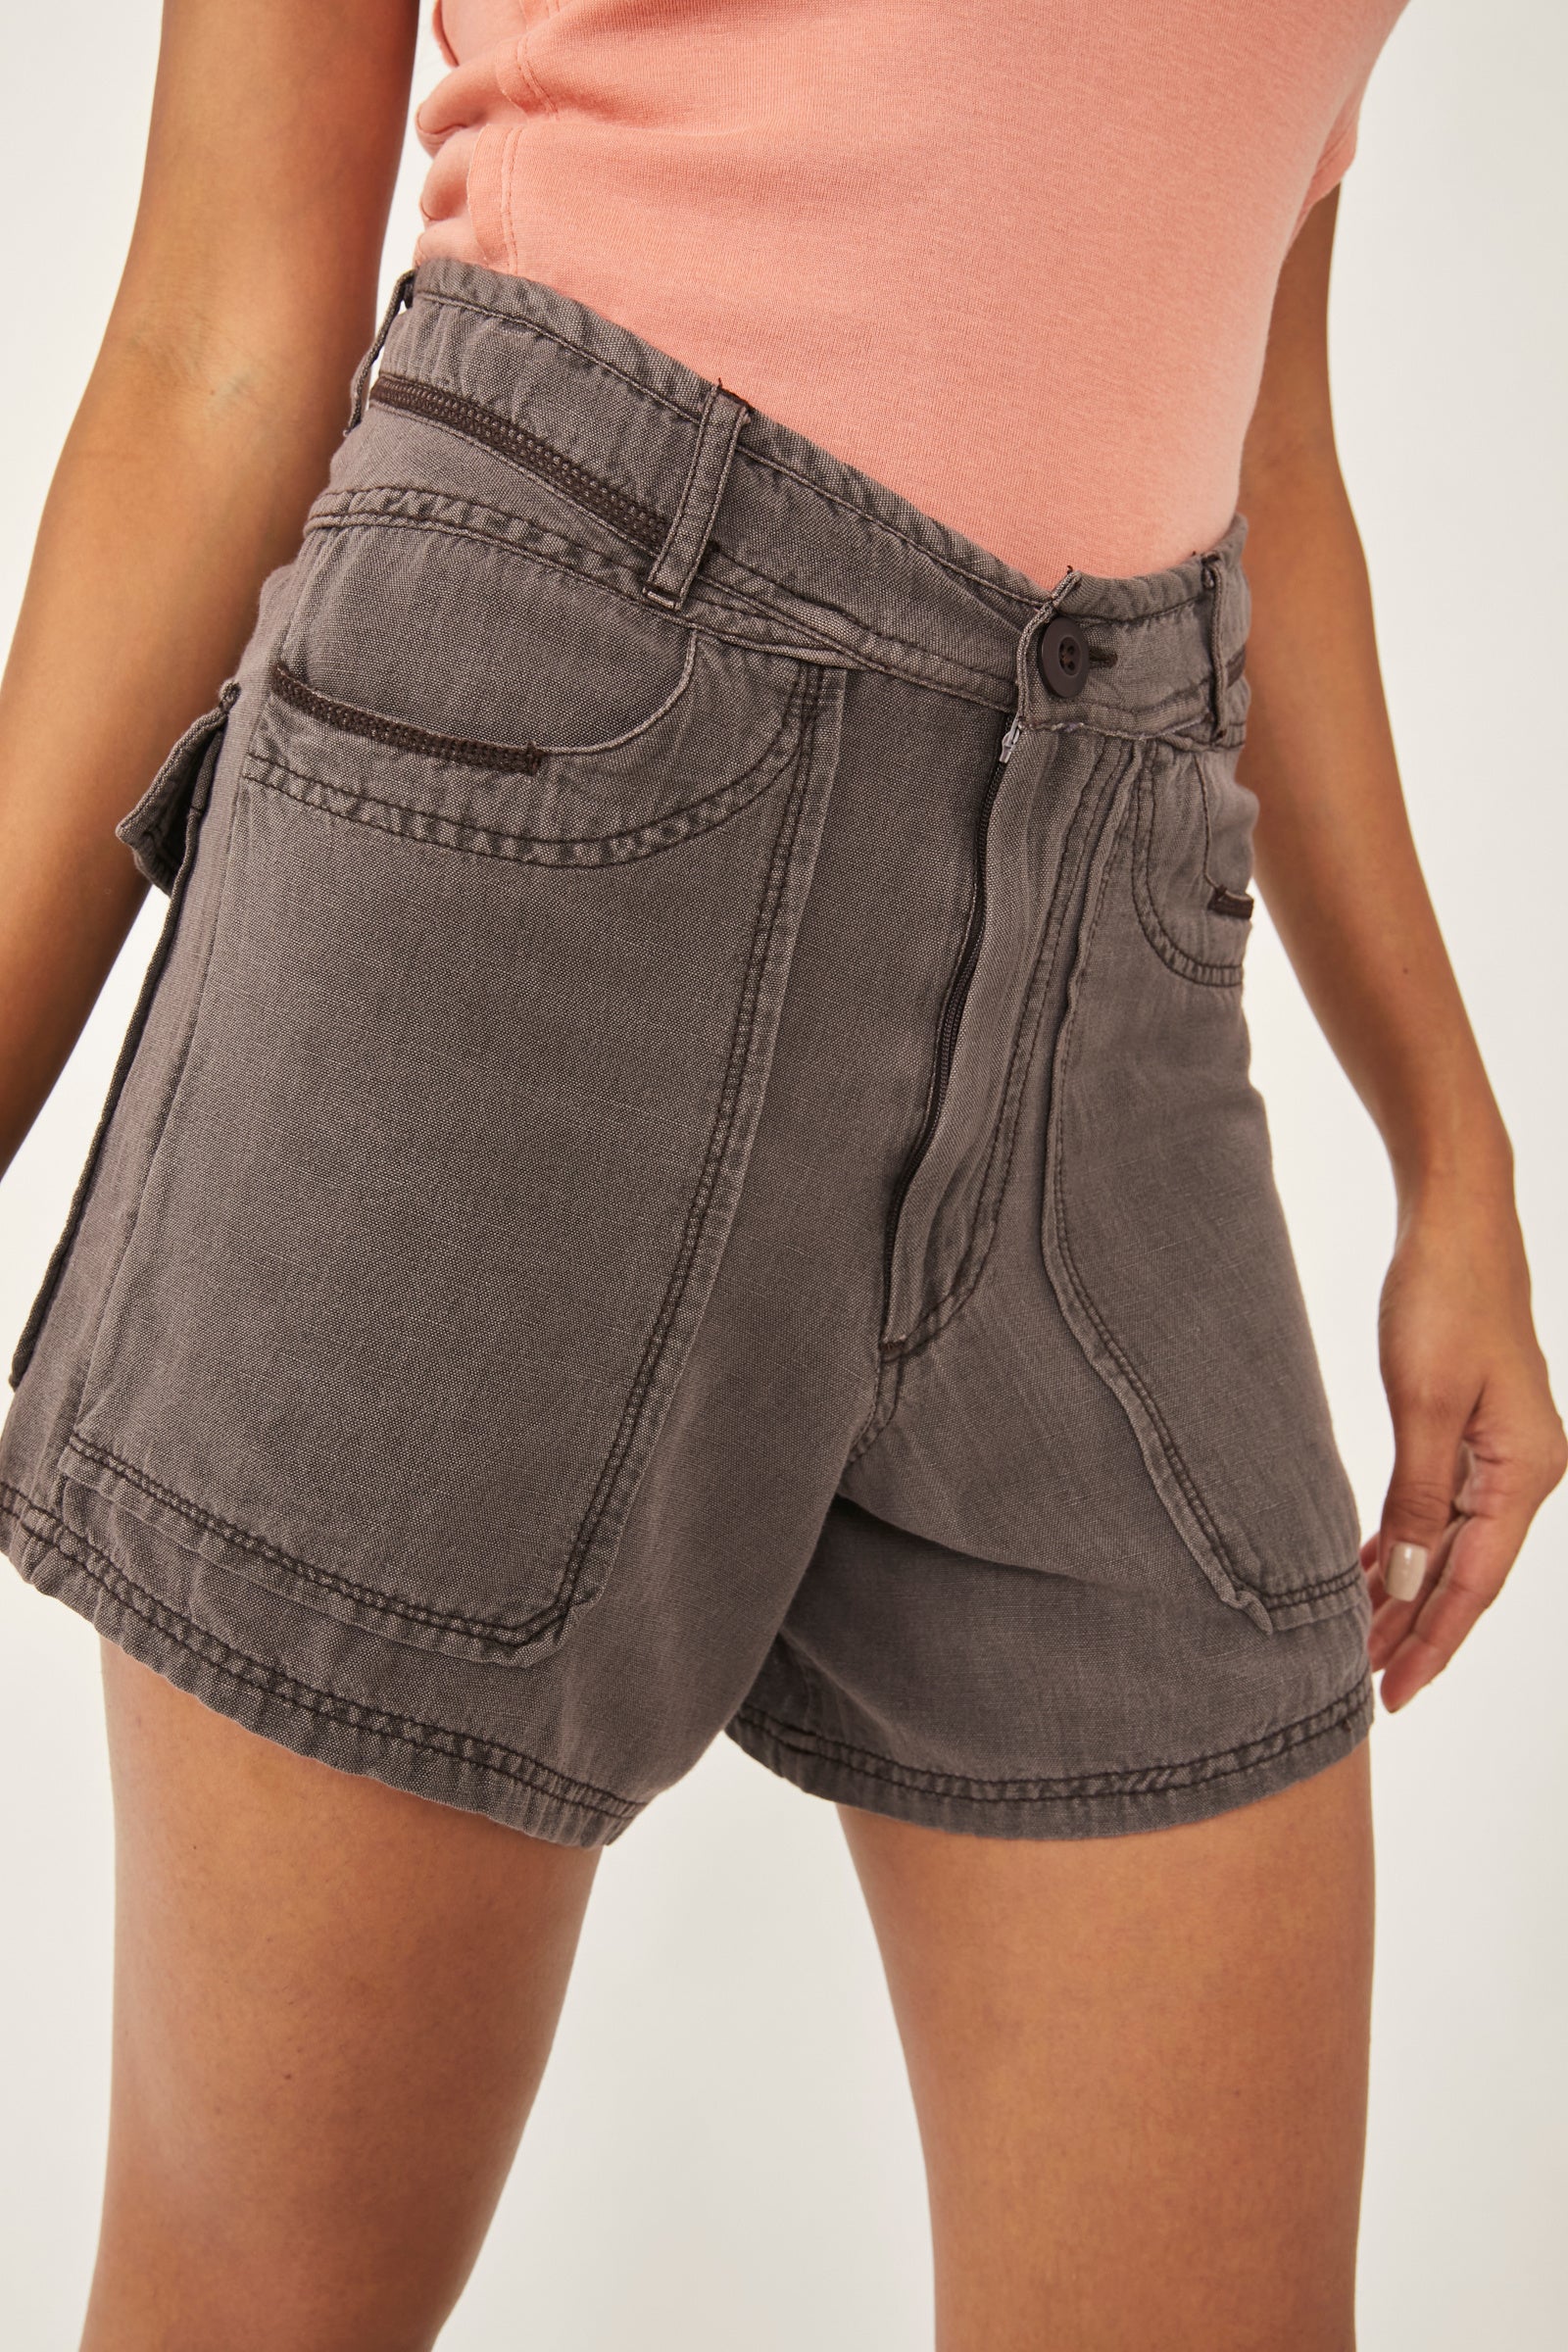 Ouro Boros Structured Short Free People